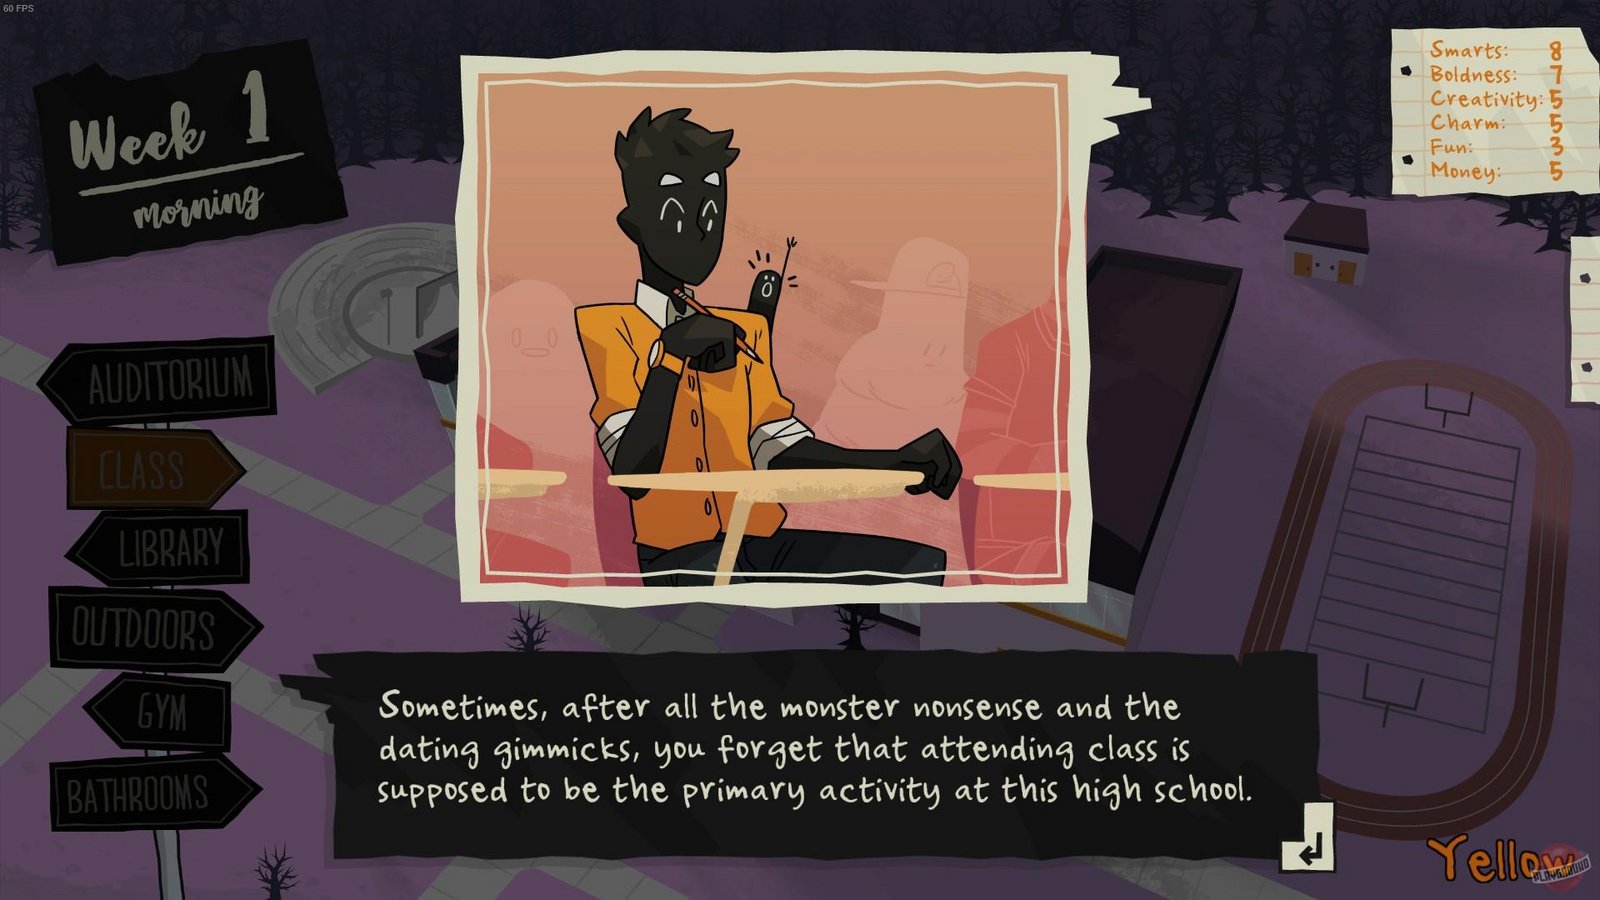 Monster Prom: Second Term